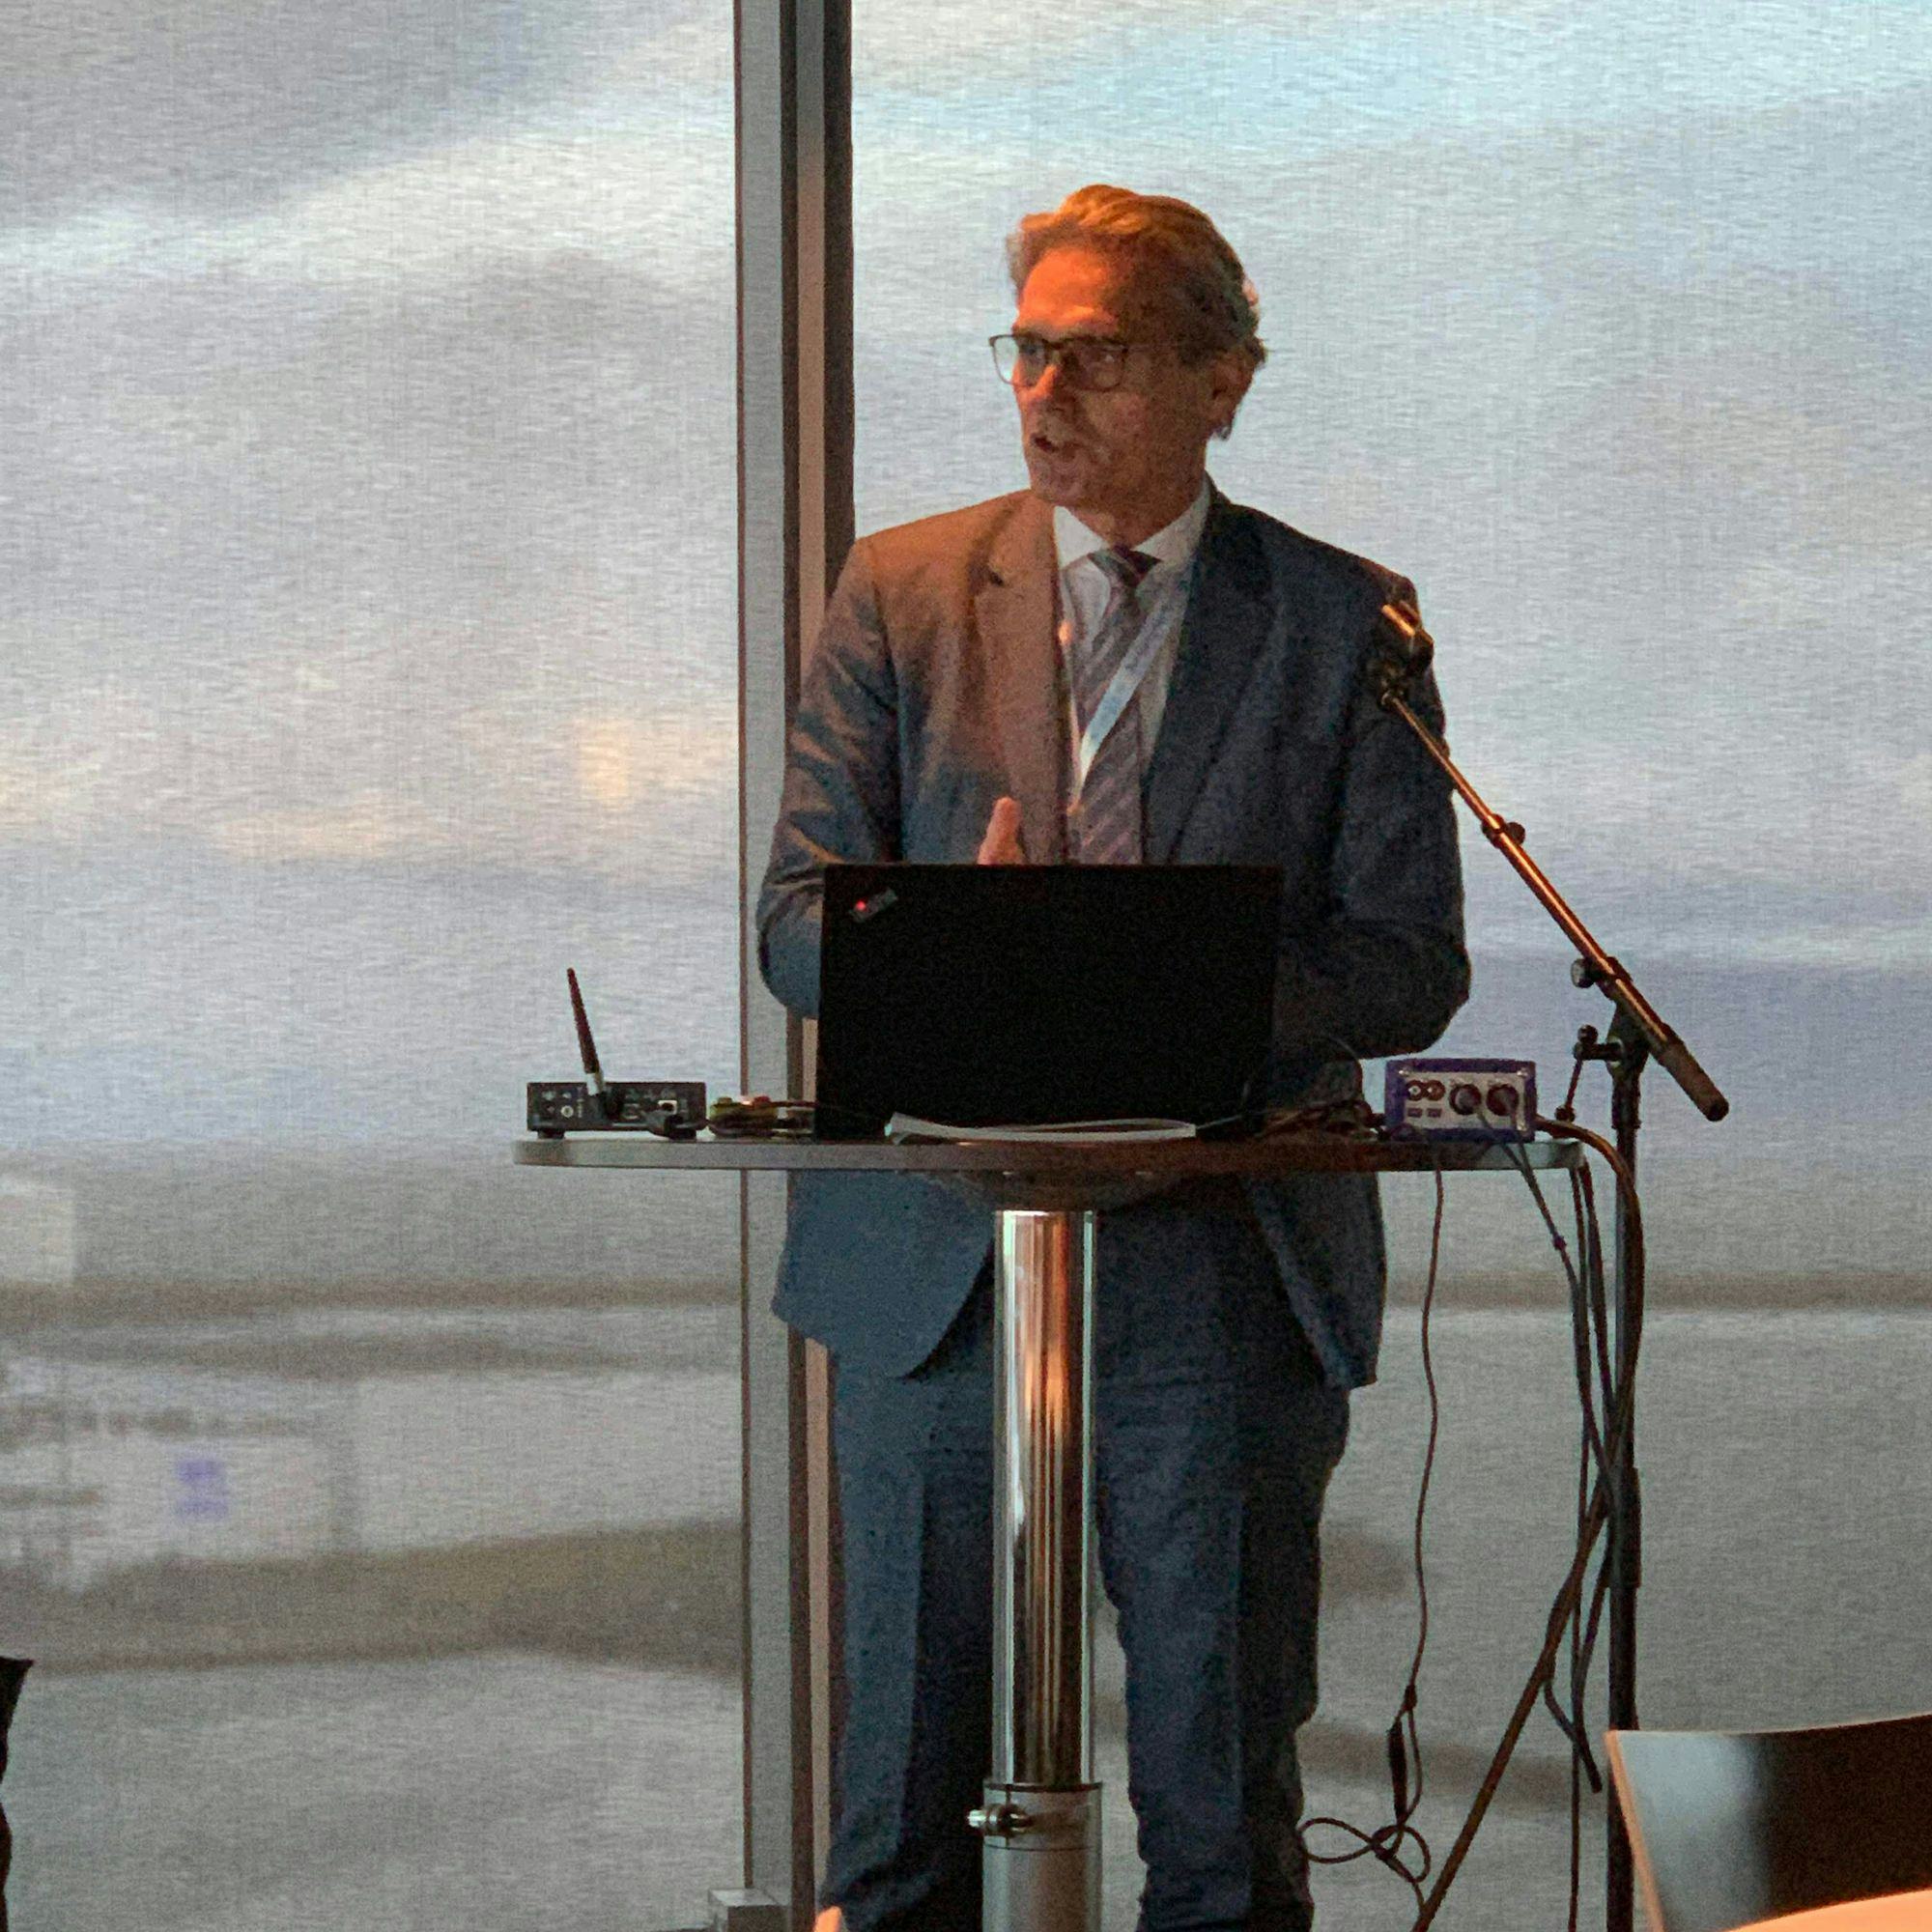 A man speaking into a microphone with a laptop and audio equipment set against a backdrop of large windows overlooking a cloudy sky